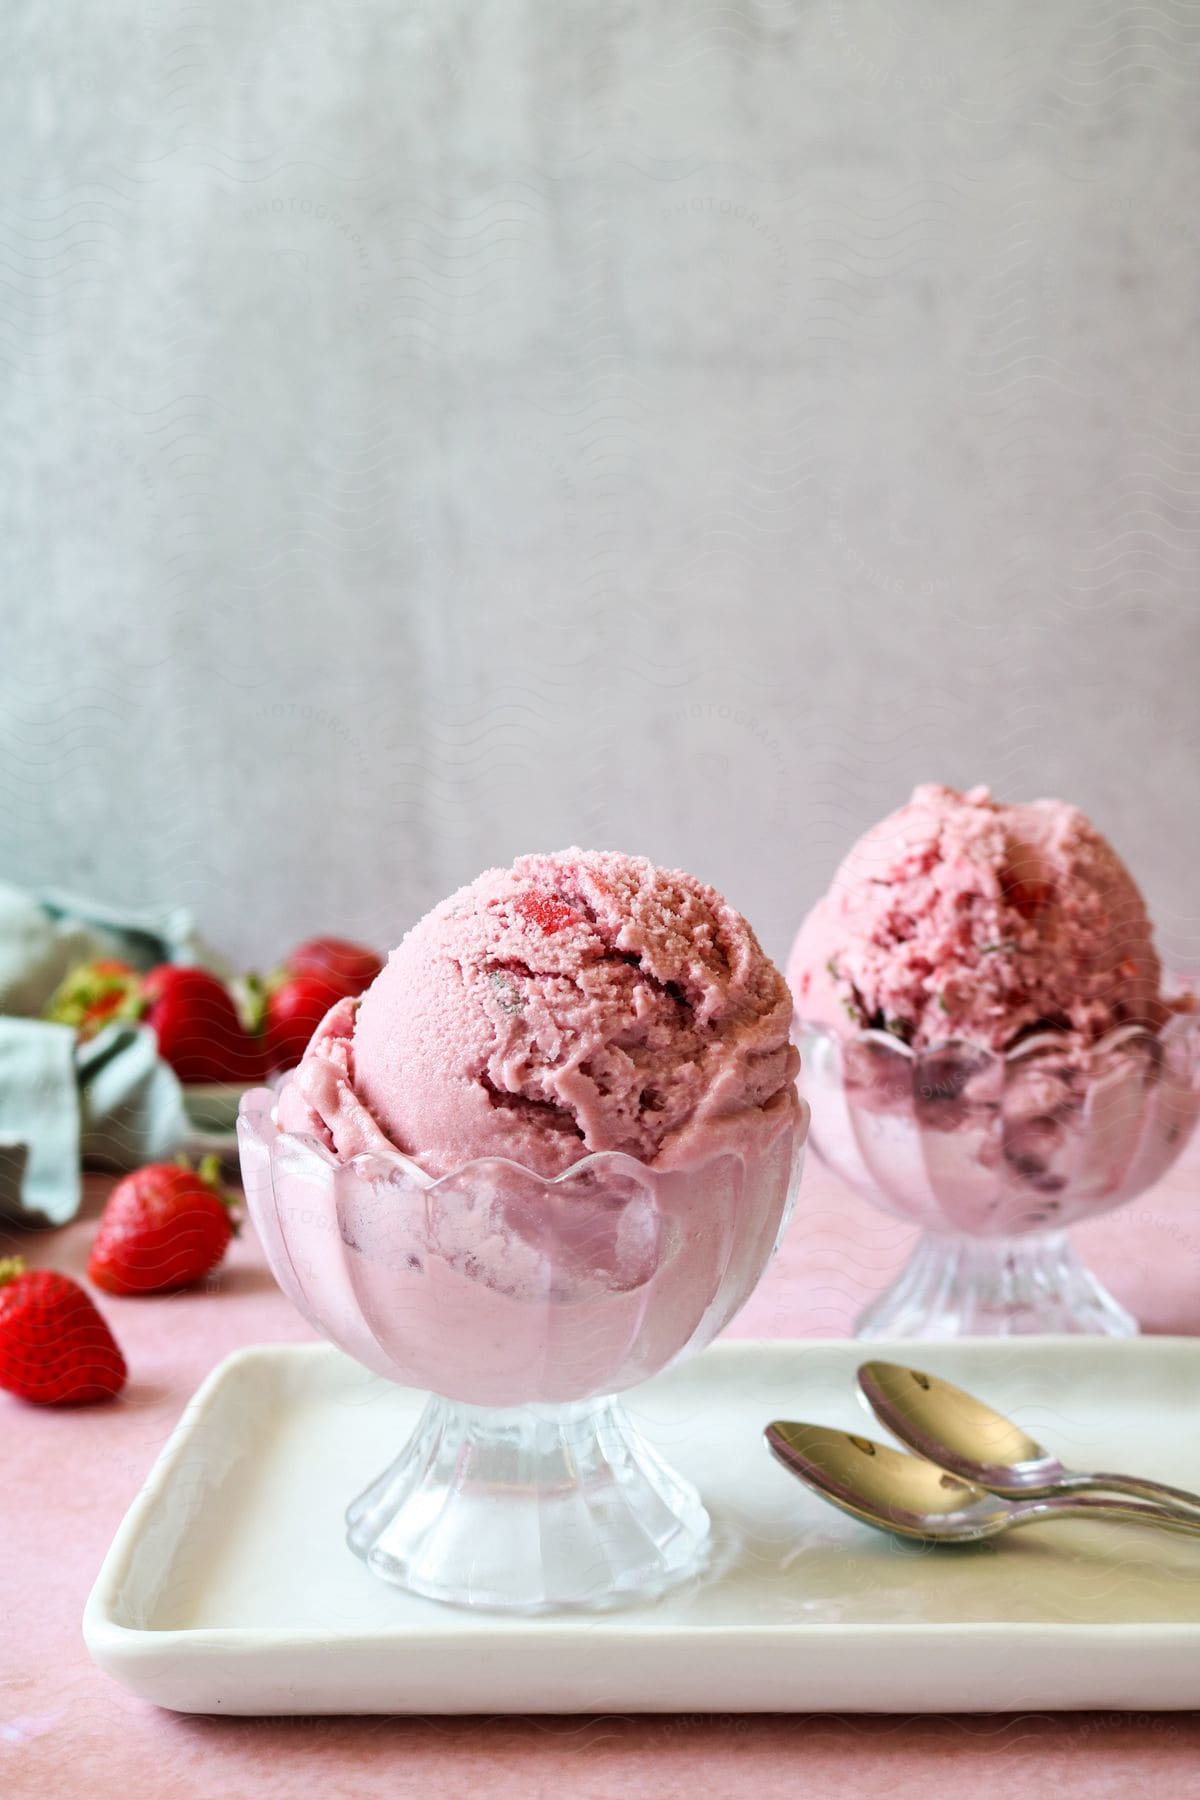 Cups with scoop of pink ice cream on a table